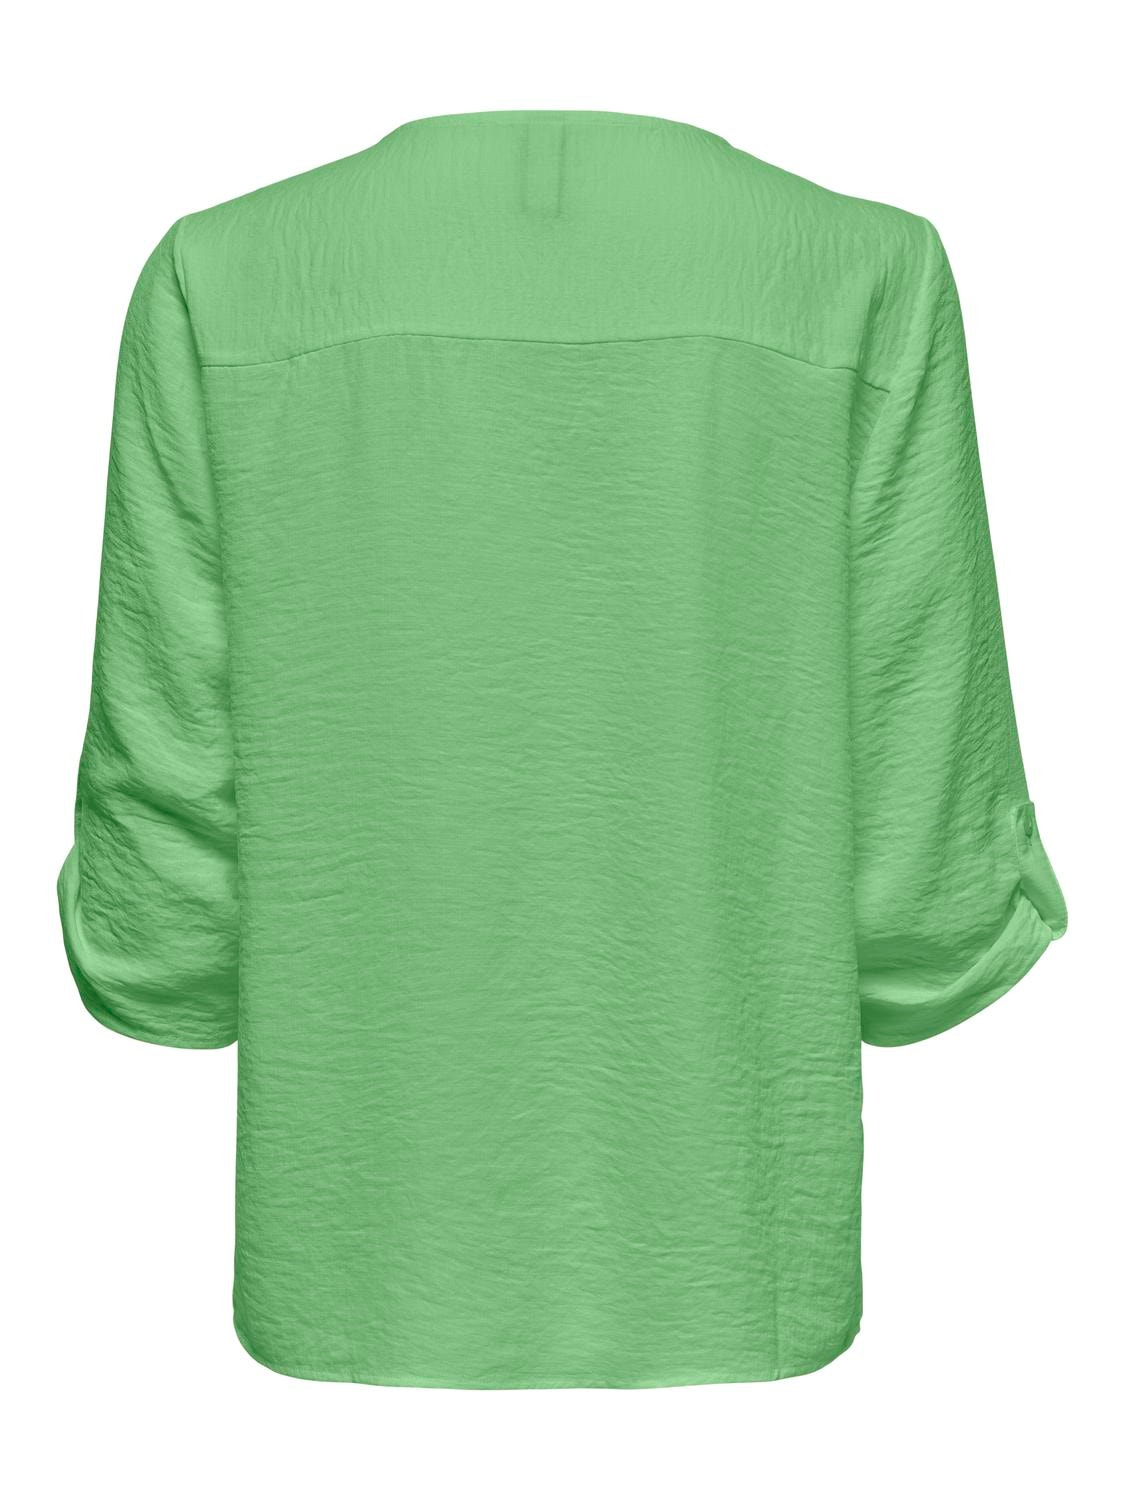 ONLY Solid colored 3/4 sleeved top -Absinthe Green - 15226911